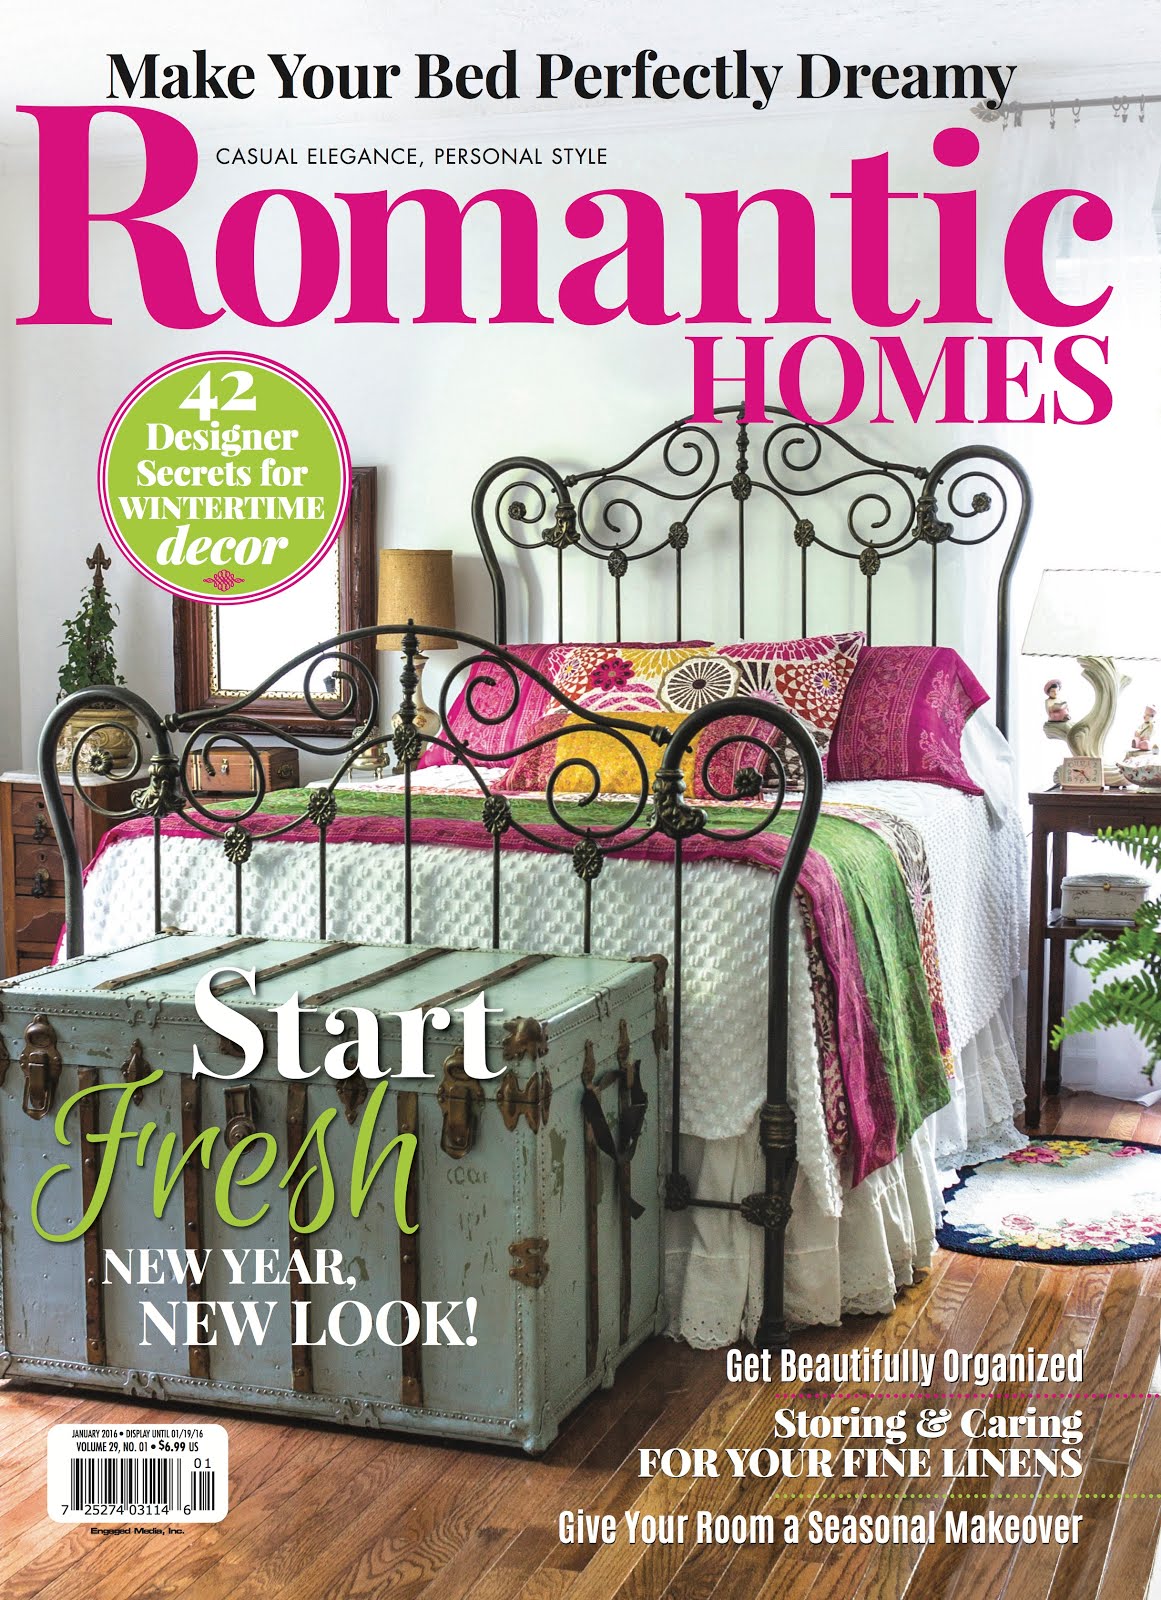 Featured on the cover of Romantic Homes Magazine!